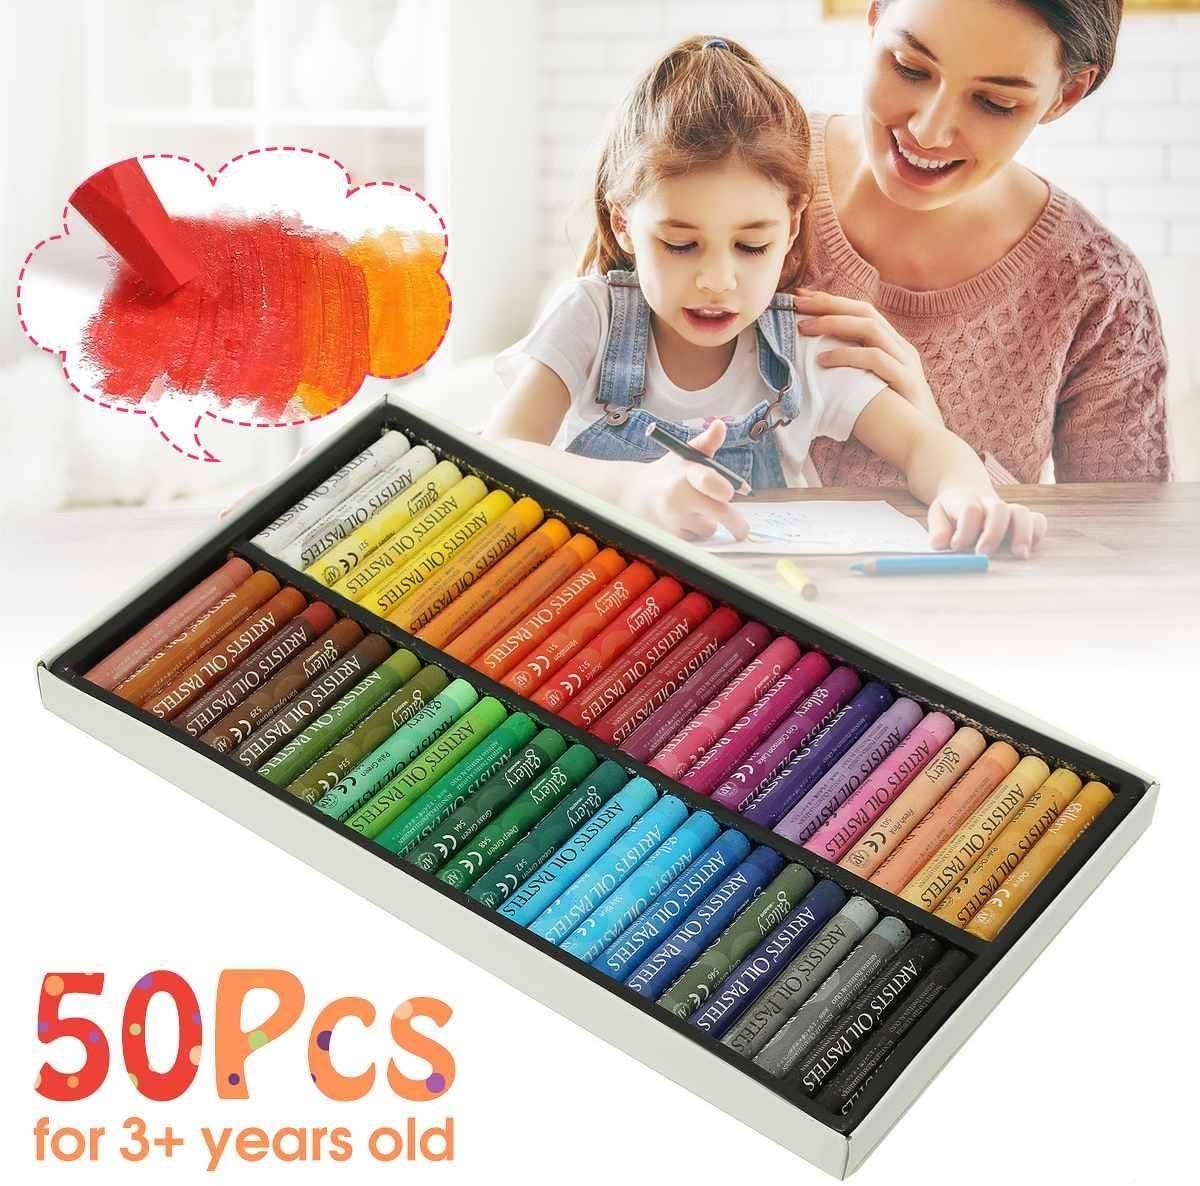 EXTRIC Oil Pastels 25 Colors Count Soft Pastels, Oil Pastels for Kids and  Artists, Oil Crayons